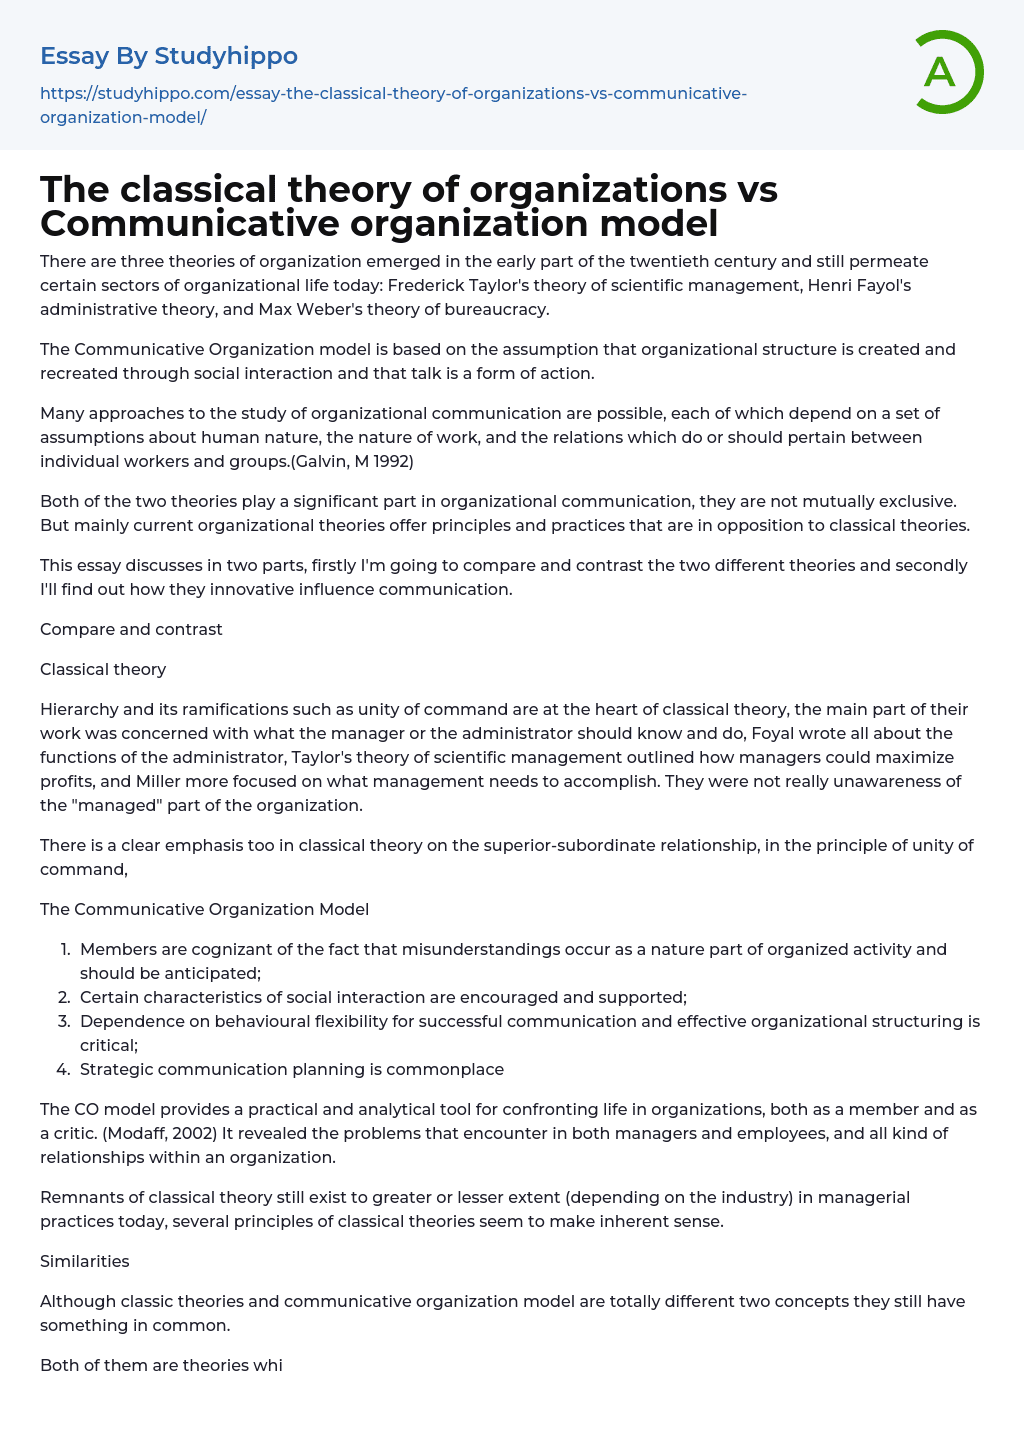 The classical theory of organizations vs Communicative organization model Essay Example